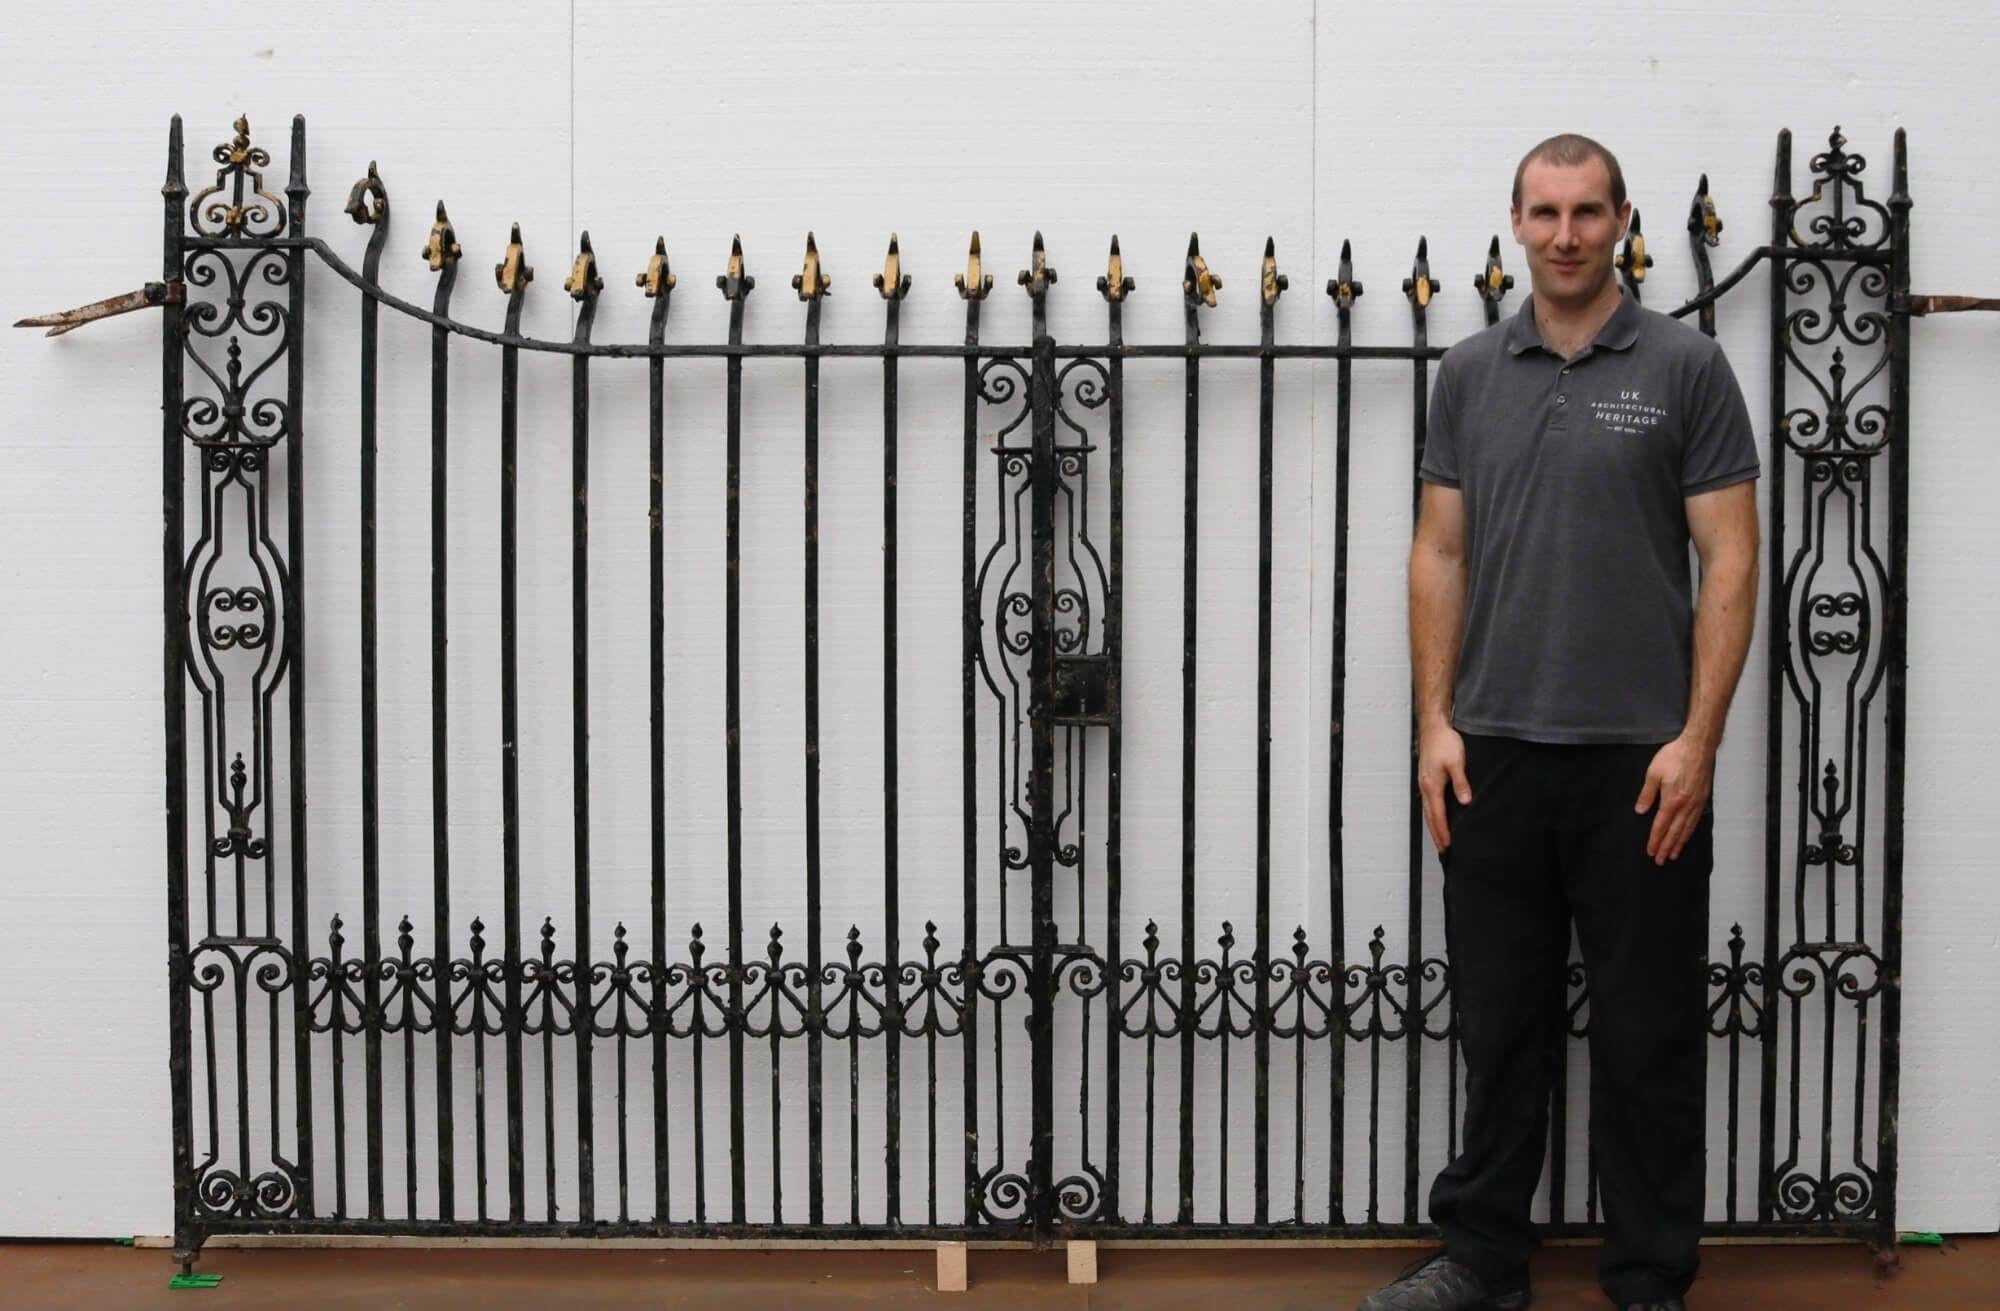 Made by a talented blacksmith in the early 1800s, this stunning set of strong wrought iron driveway gates make a beautiful entrance to a property. Sourced from a traditional country house in Cambridgeshire, they are tall and detailed with classic